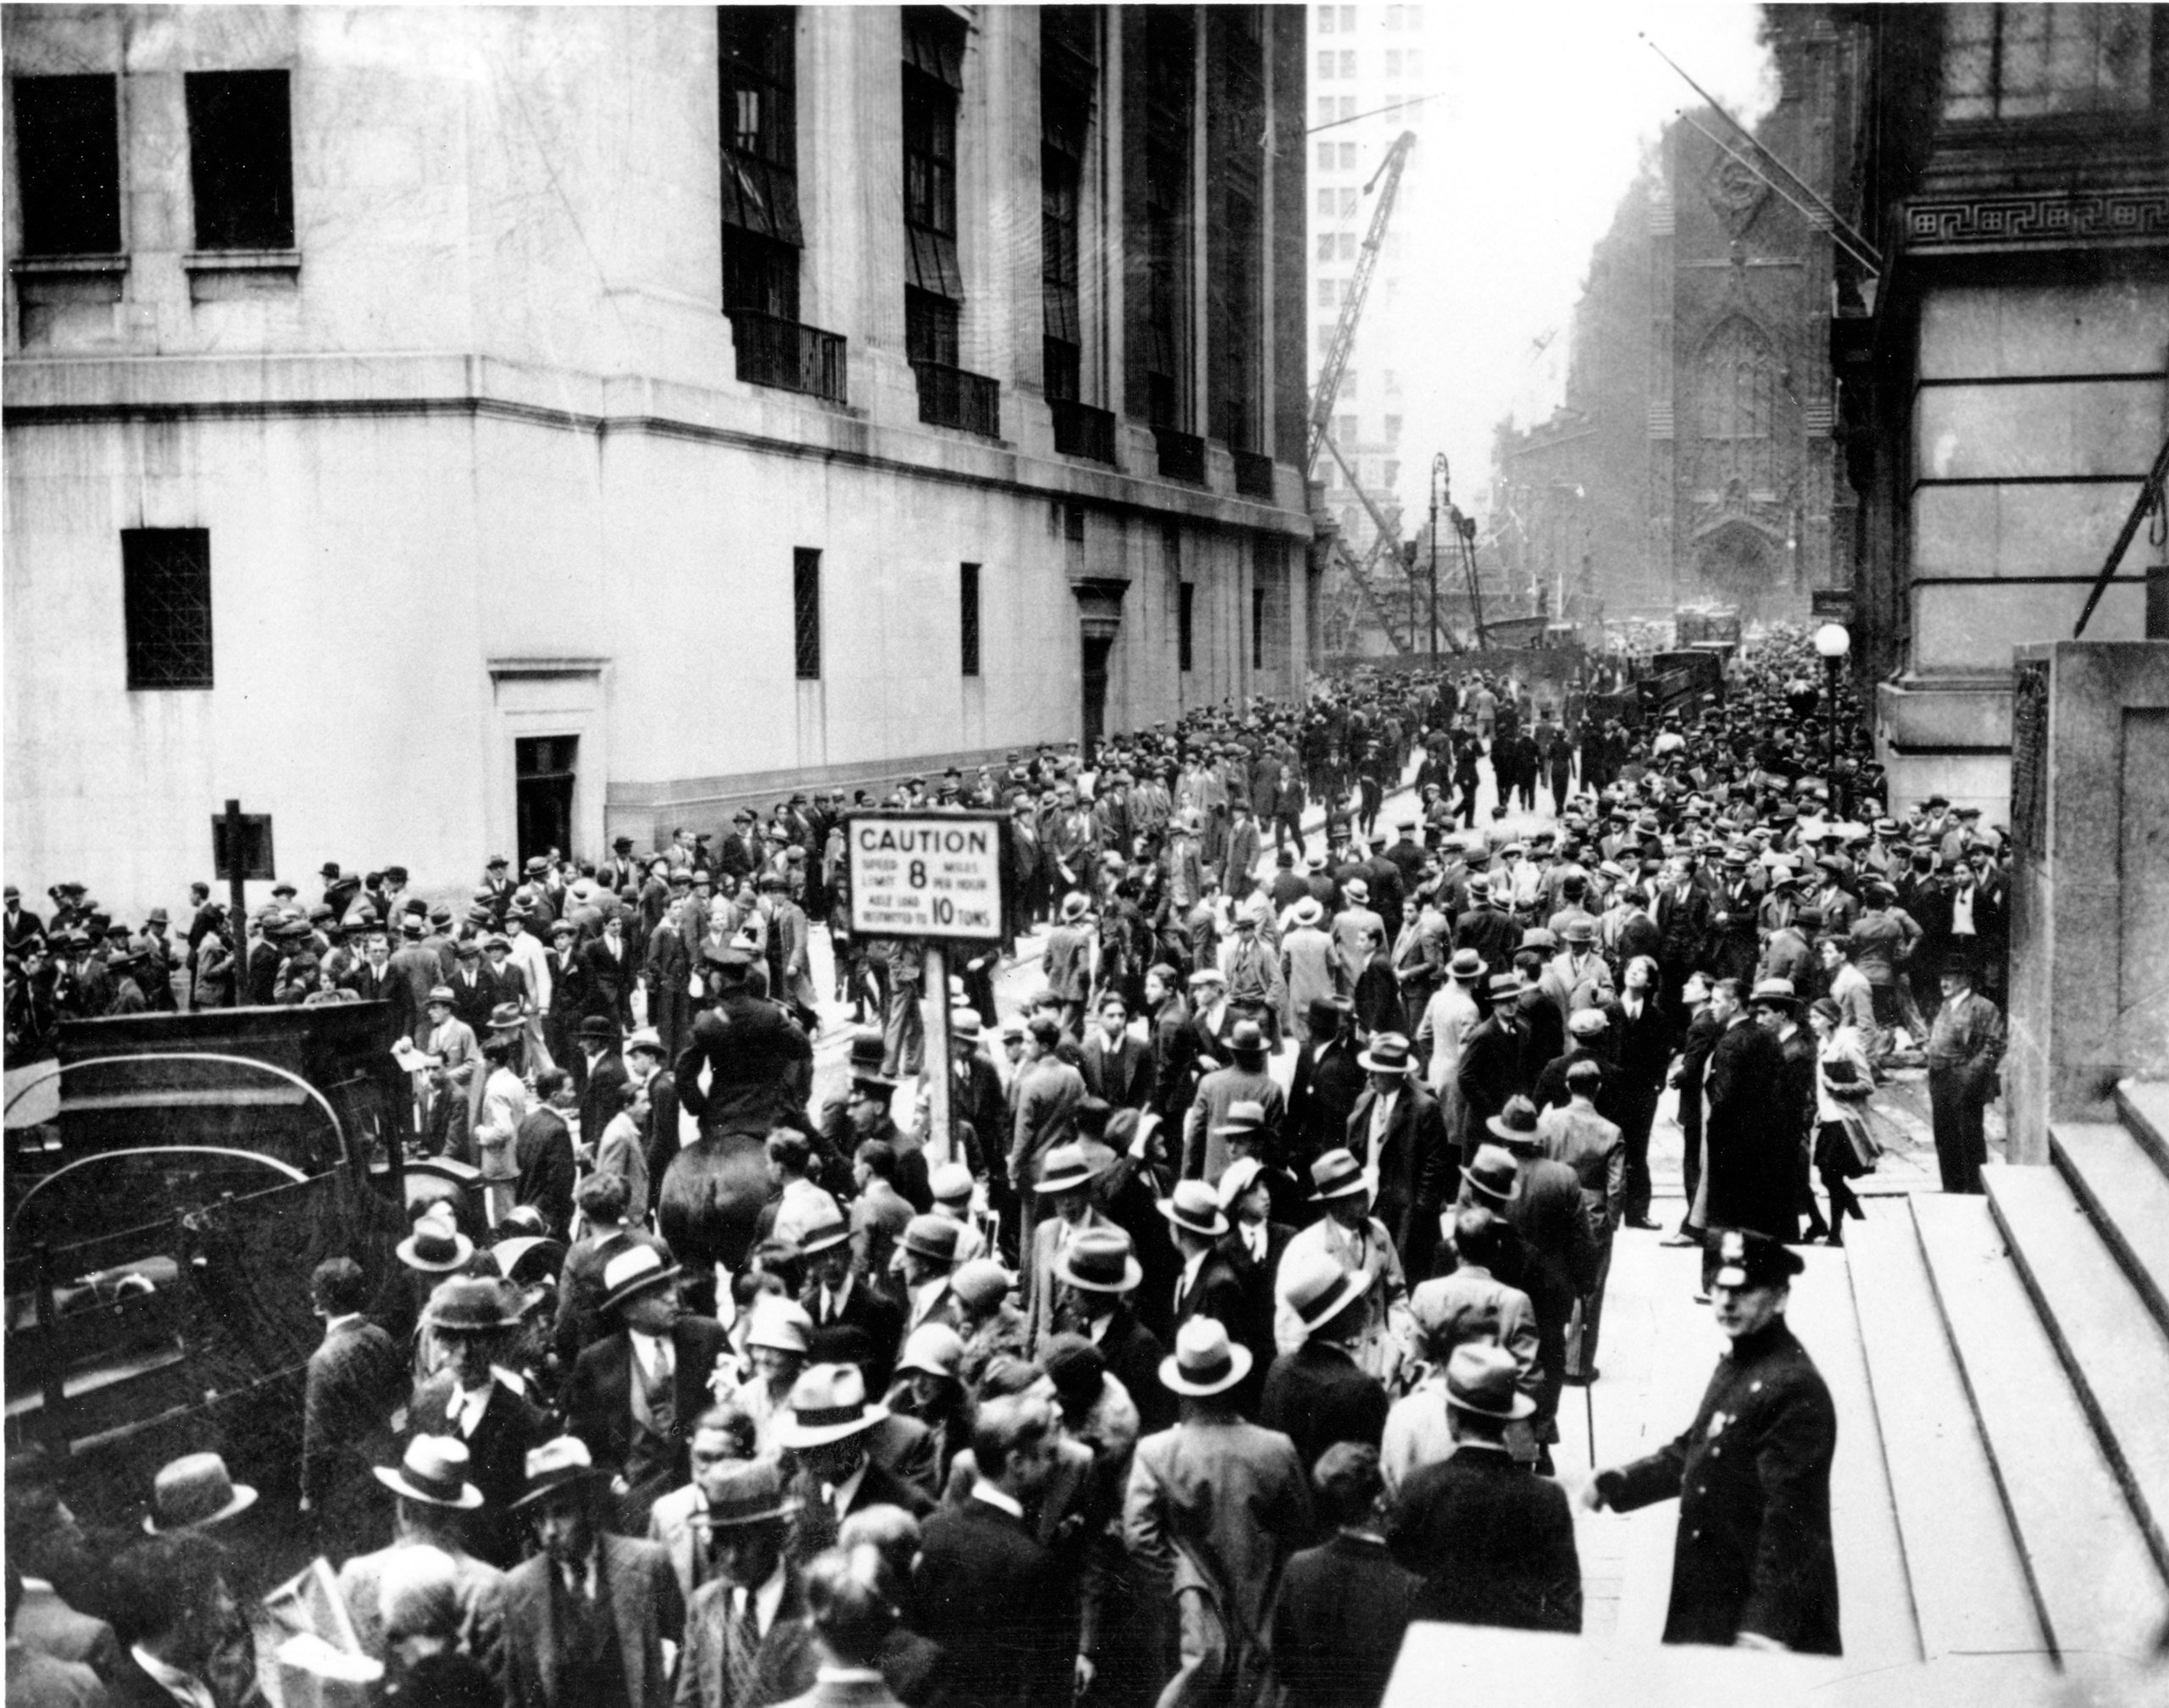 Crowd gathering on Wall Street in New York after the Wall Street crash late October 1929.